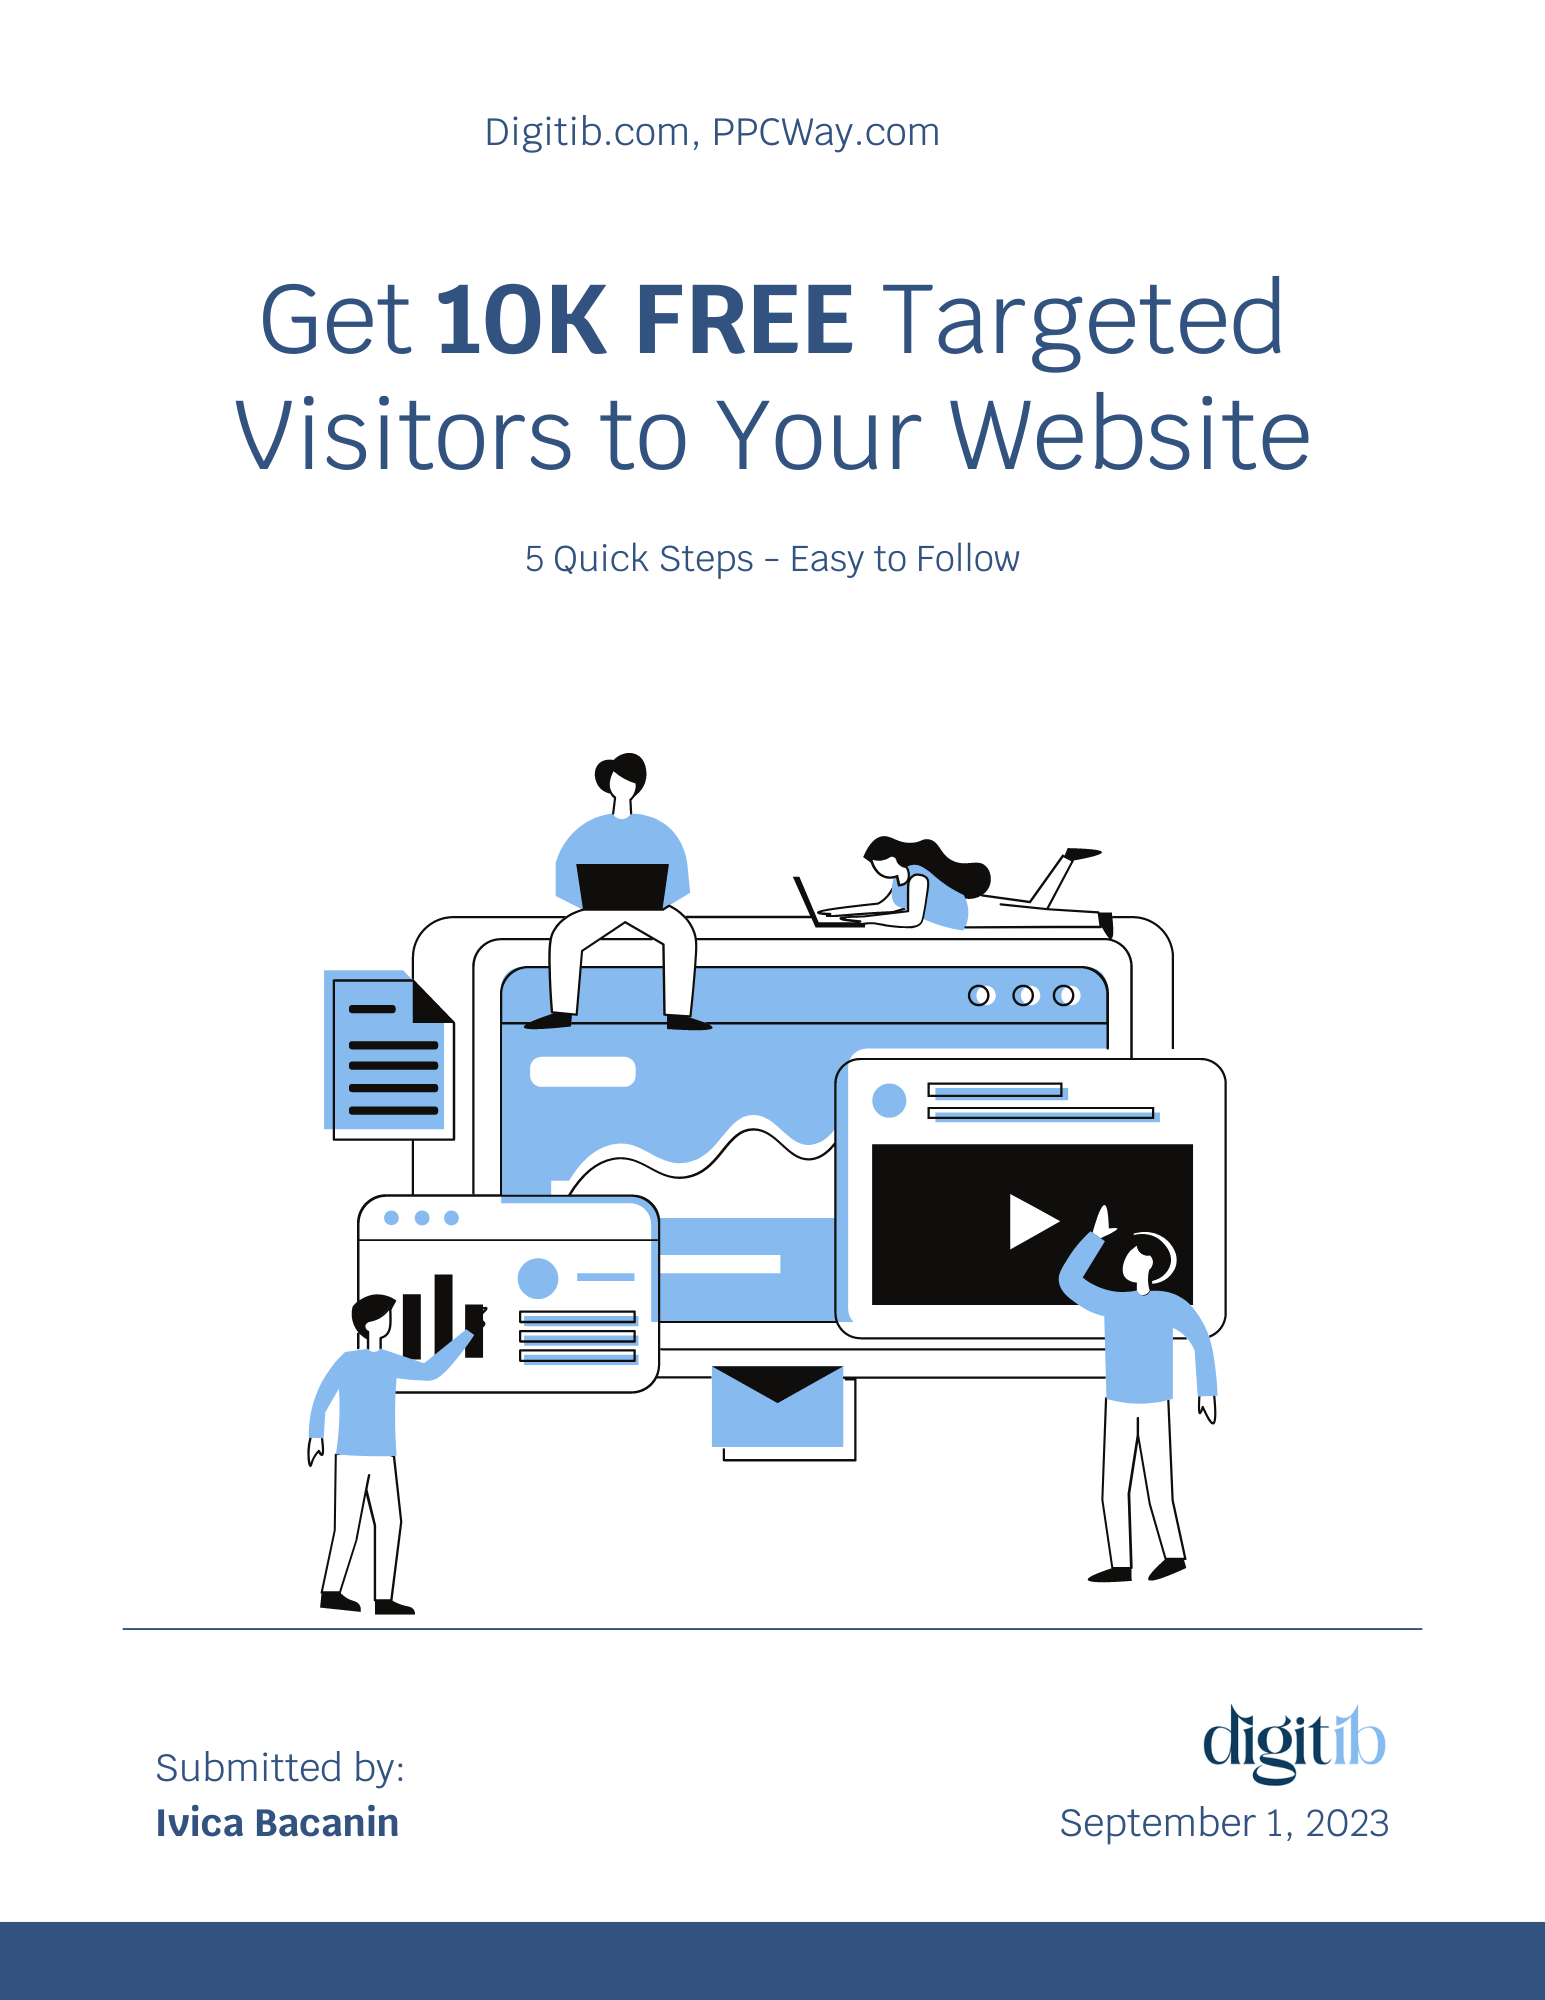 Get 10K FREE Targeted Visitors to Your Website